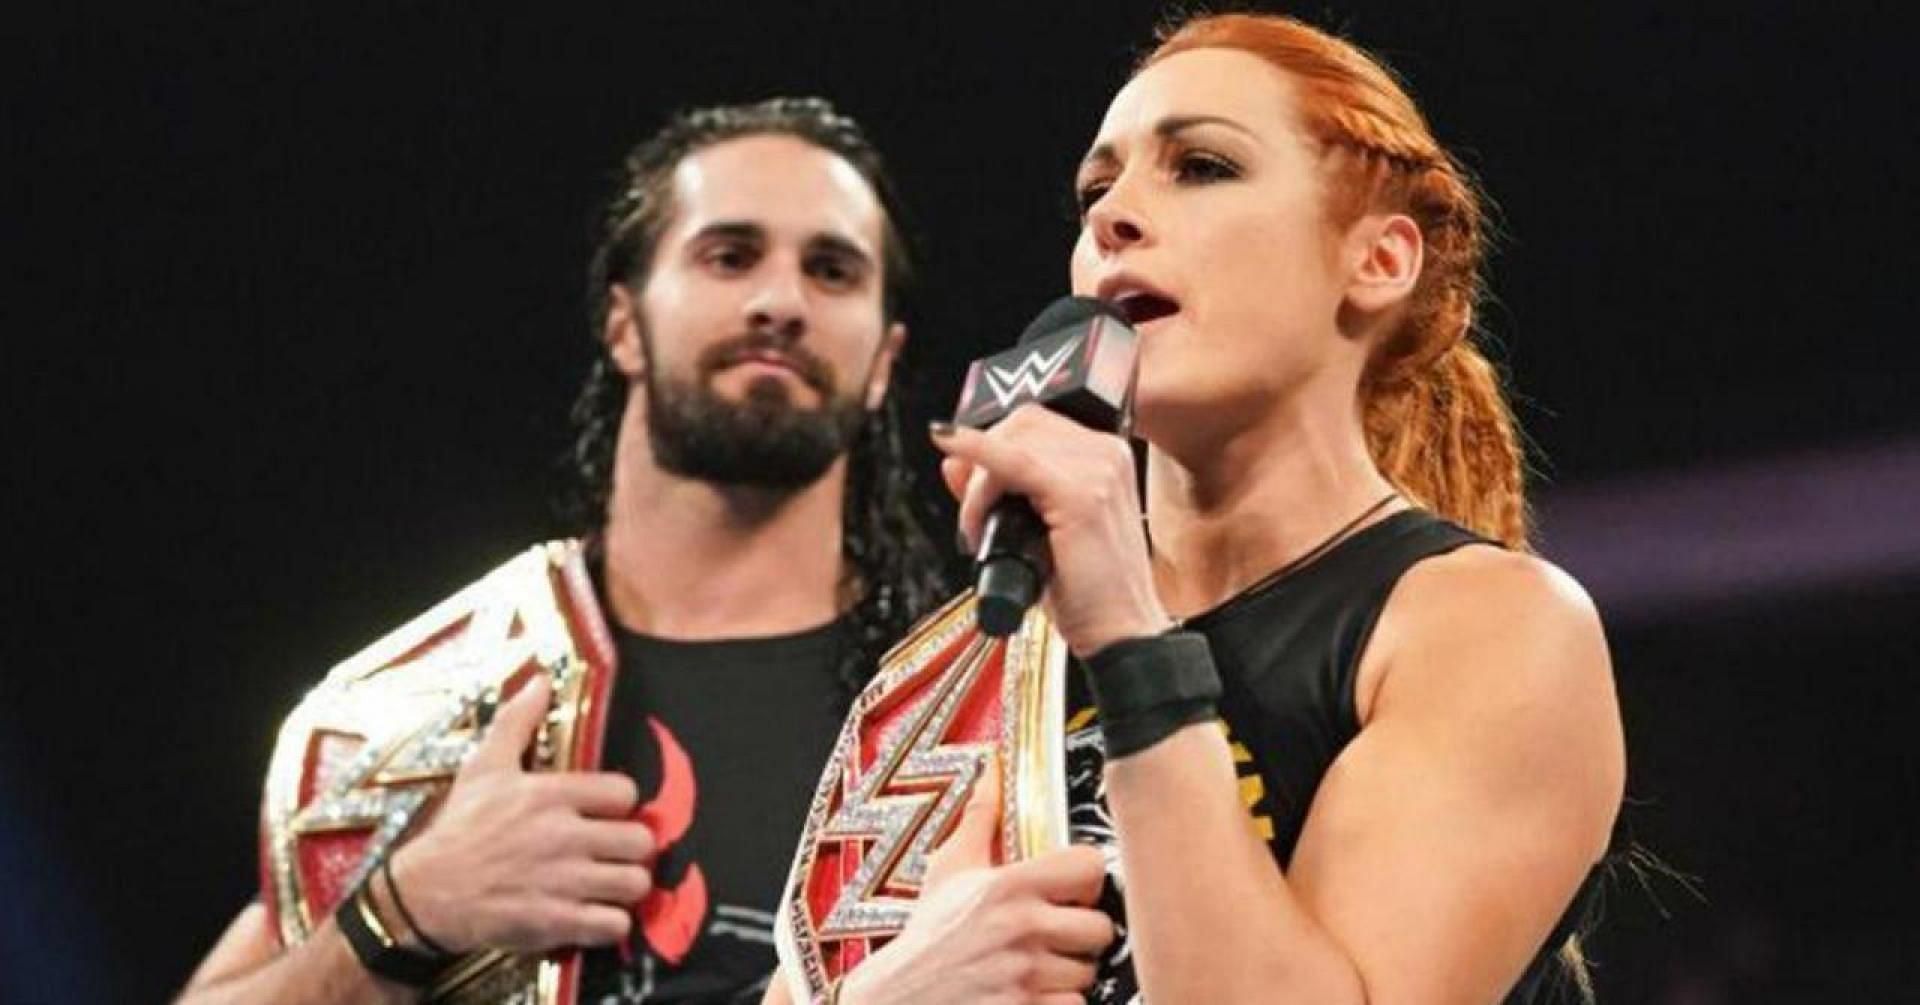 Seth Rollins believes that the seven-hour WrestleManias were obnoxious